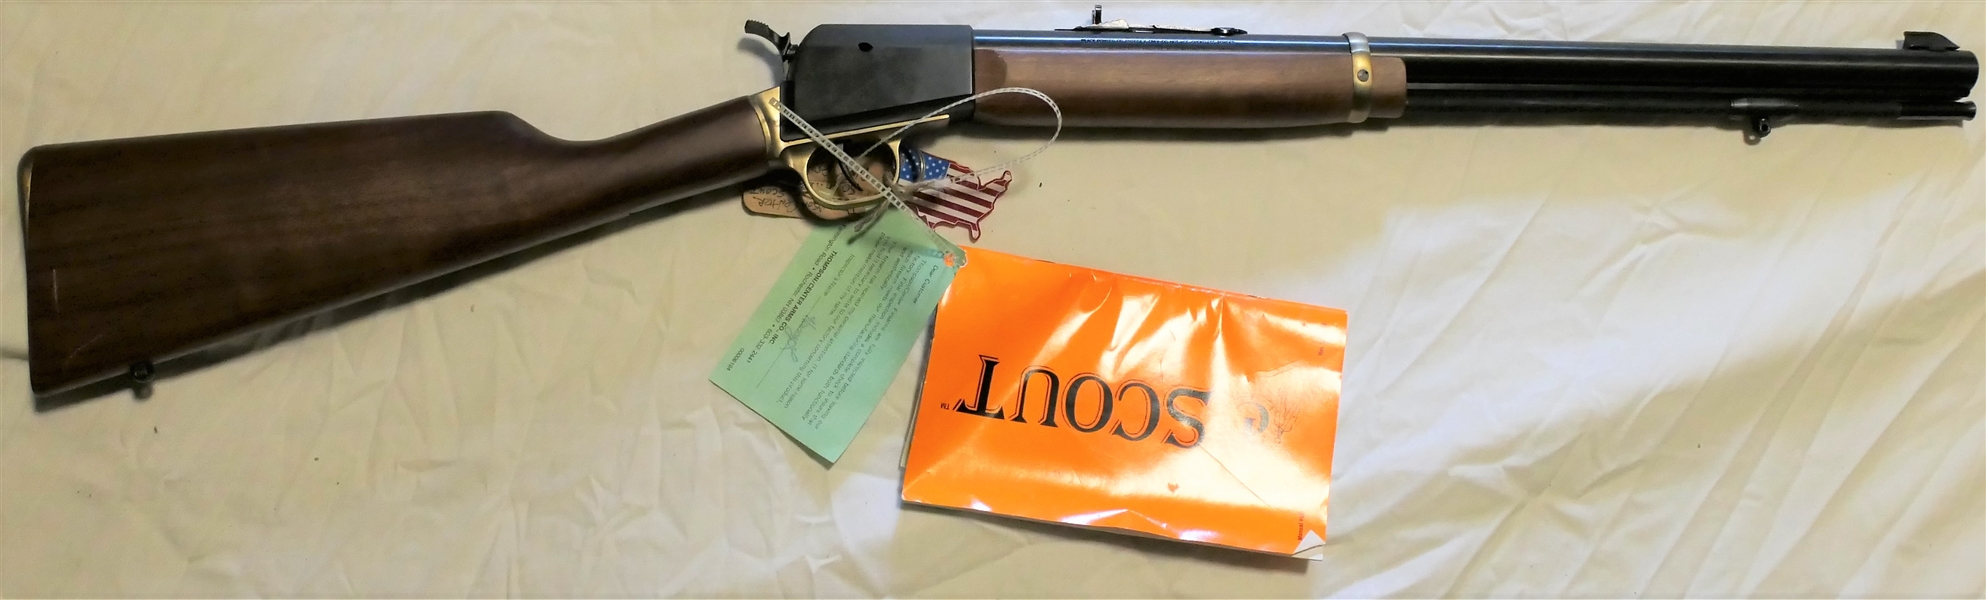 Thompson Center Arms "Scout" .50 Caliber Black Powder Rifle with Original Instructions, Card, and Key Chain